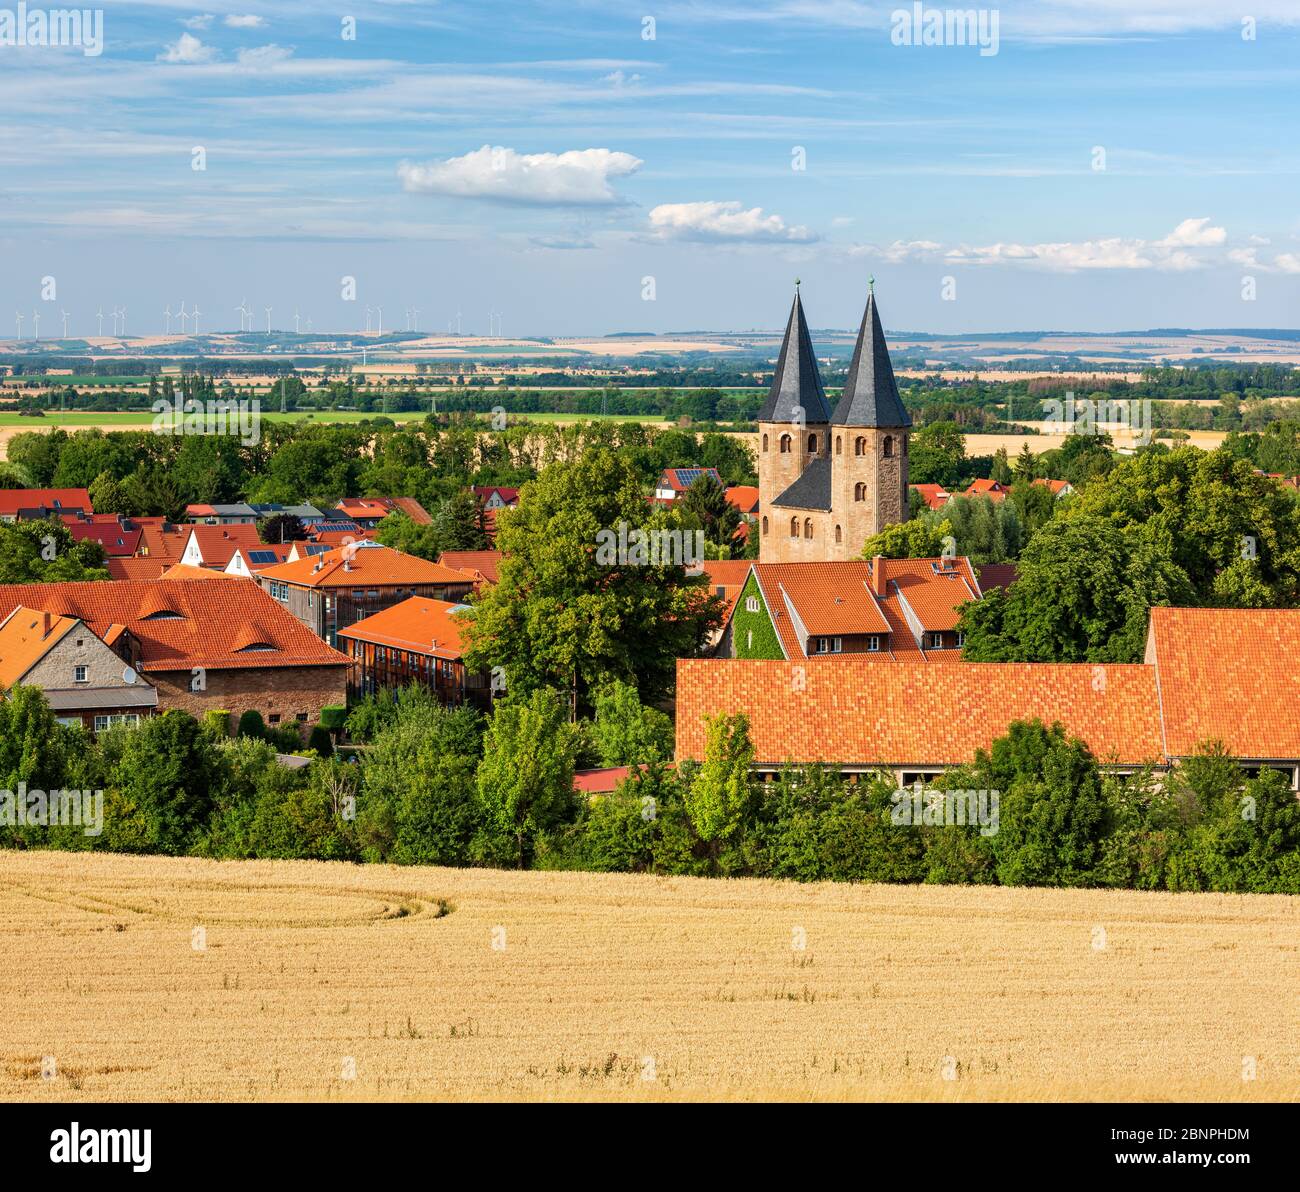 Germany, Saxony-Anhalt, view over wheat field to place and Drübeck monastery Stock Photo